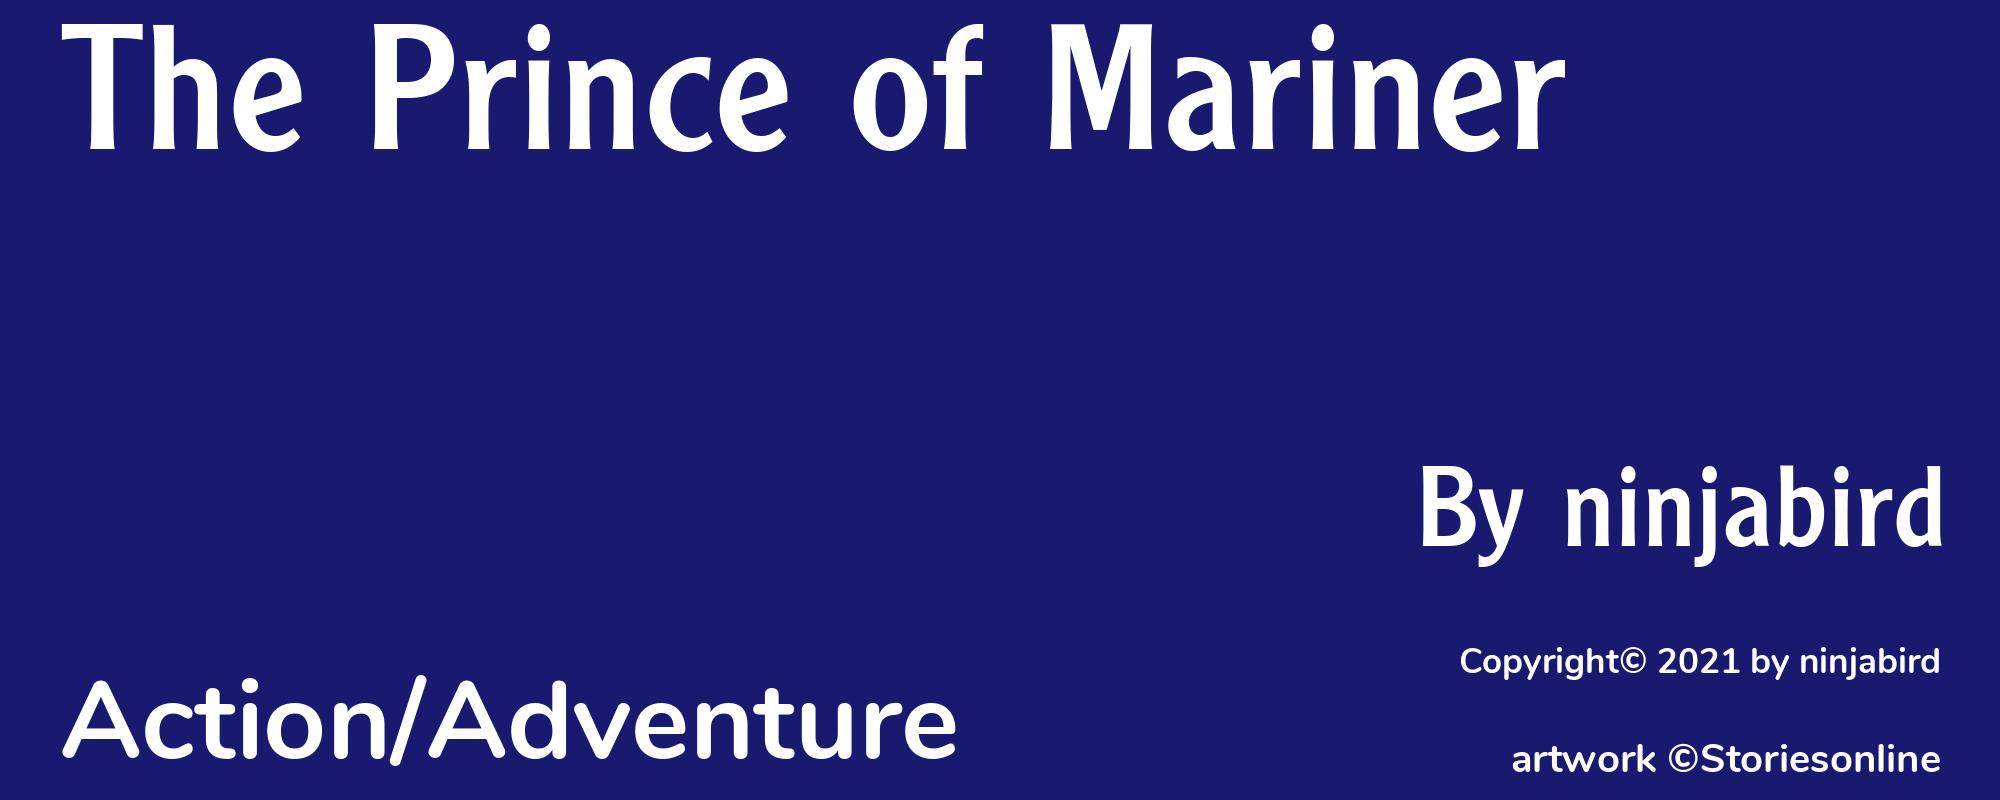 The Prince of Mariner - Cover